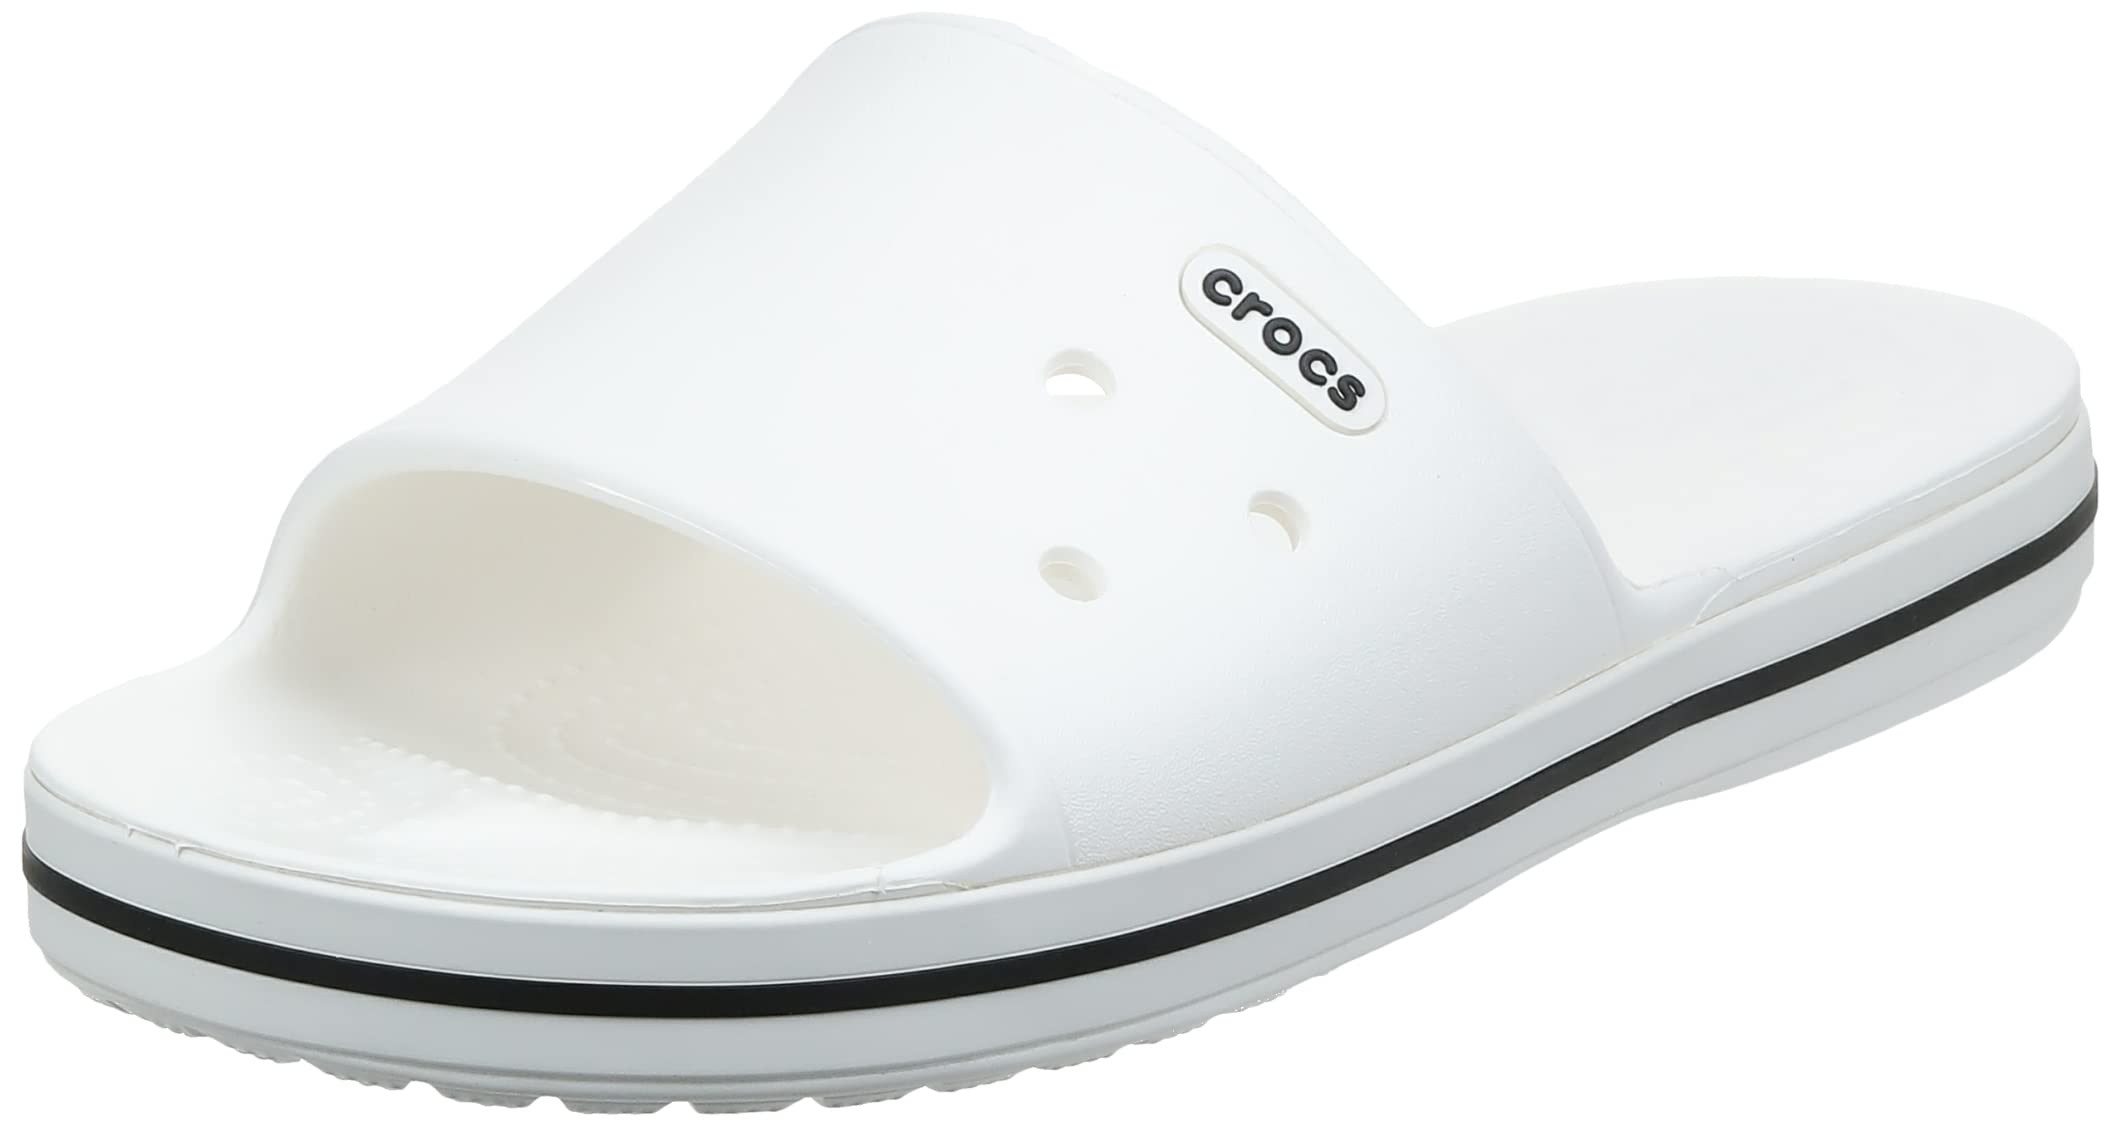 Book Cover Crocs Men's and Women's Crocband III Slide Sandals | Shower Shoes or Water Shoes